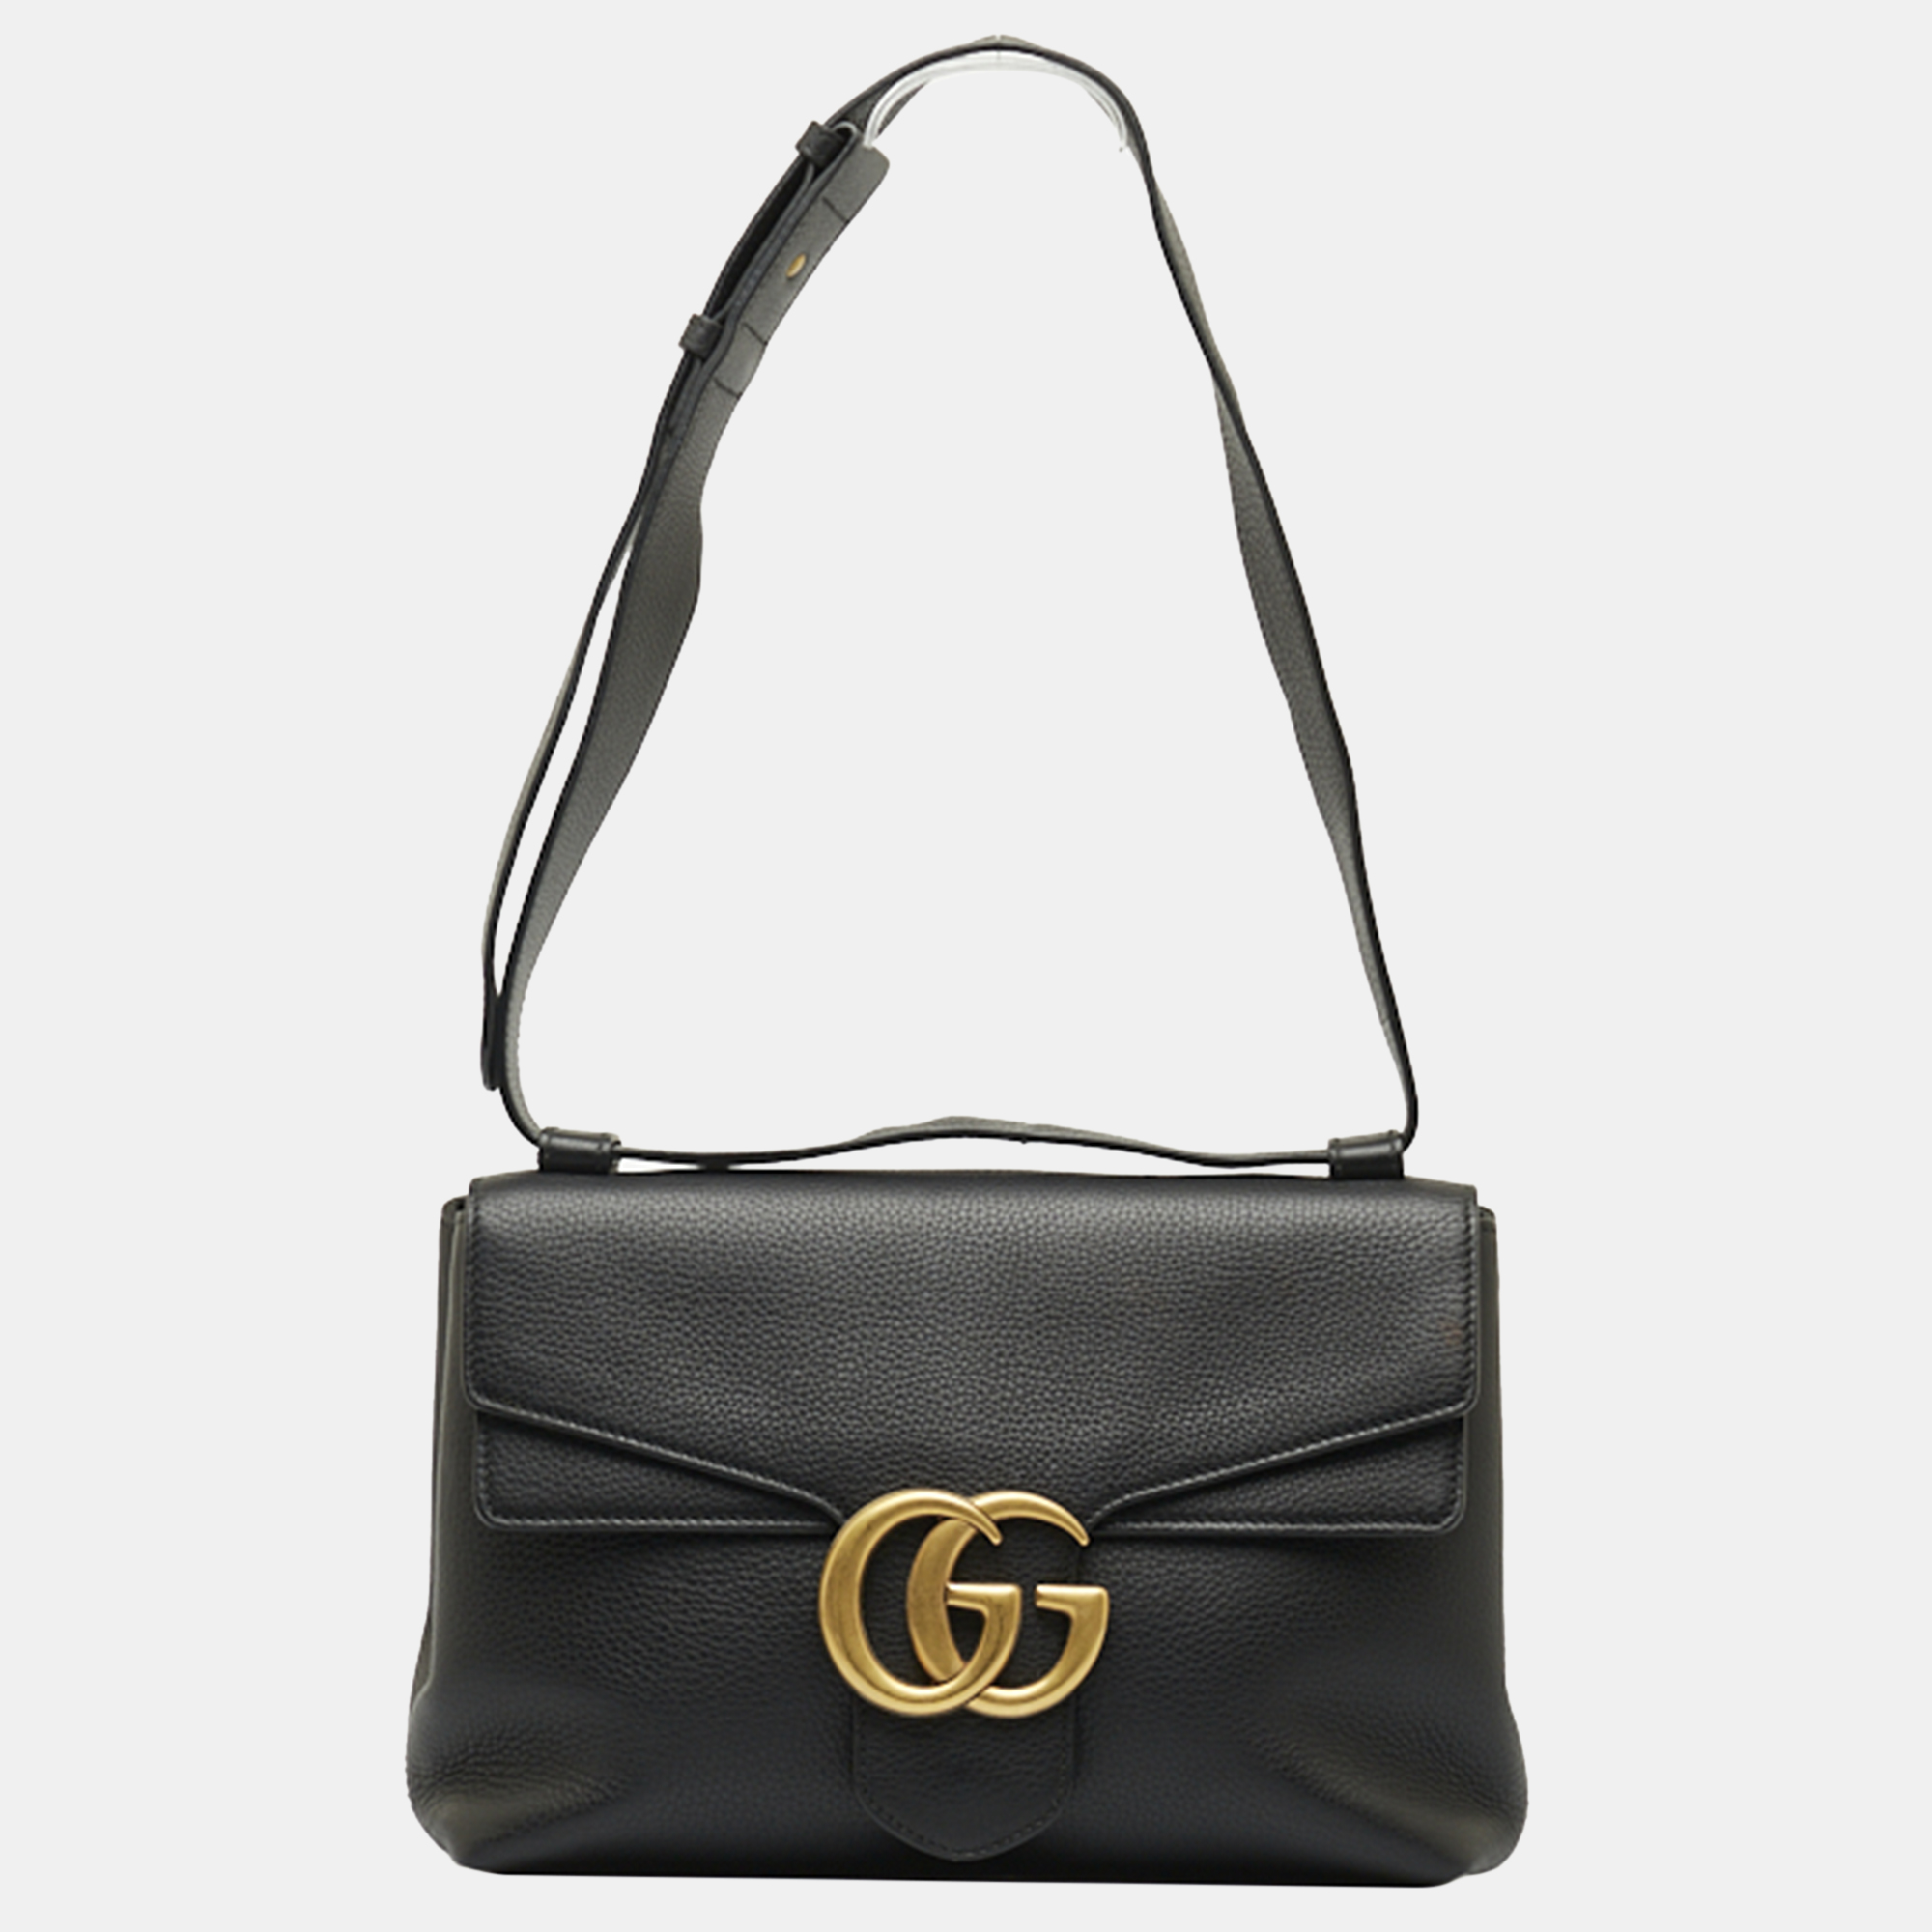 Experience luxury with this Gucci shoulder bag. Meticulously crafted with the best materials its a timeless piece that will elevate any outfit.